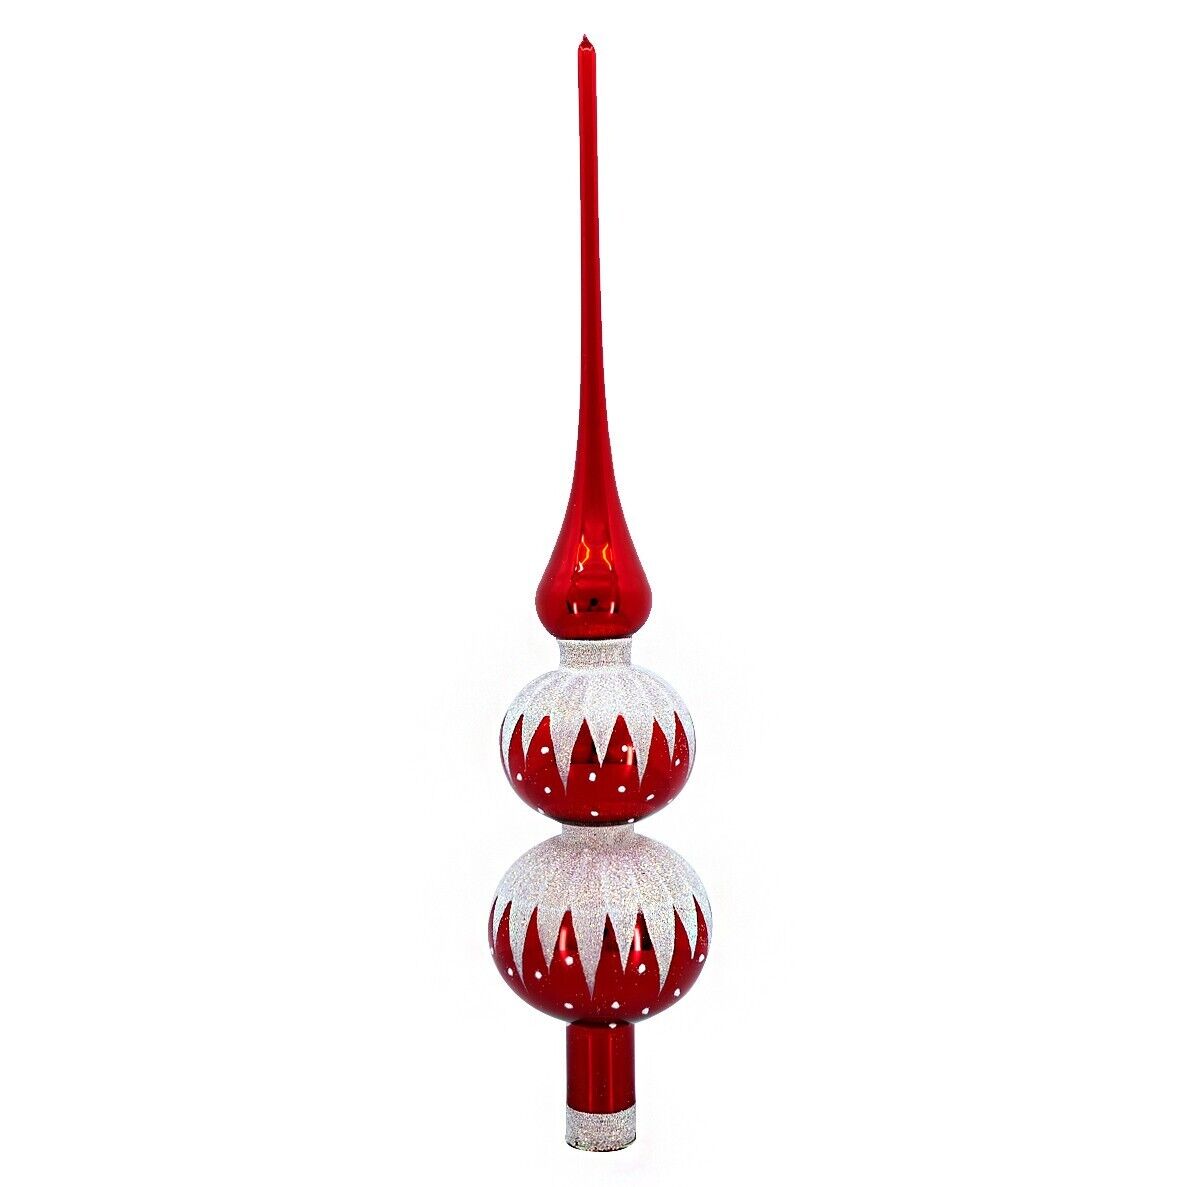 Retro Style Czech Glass Christmas Topper Handblown Ornament Top Red 10.6-inch